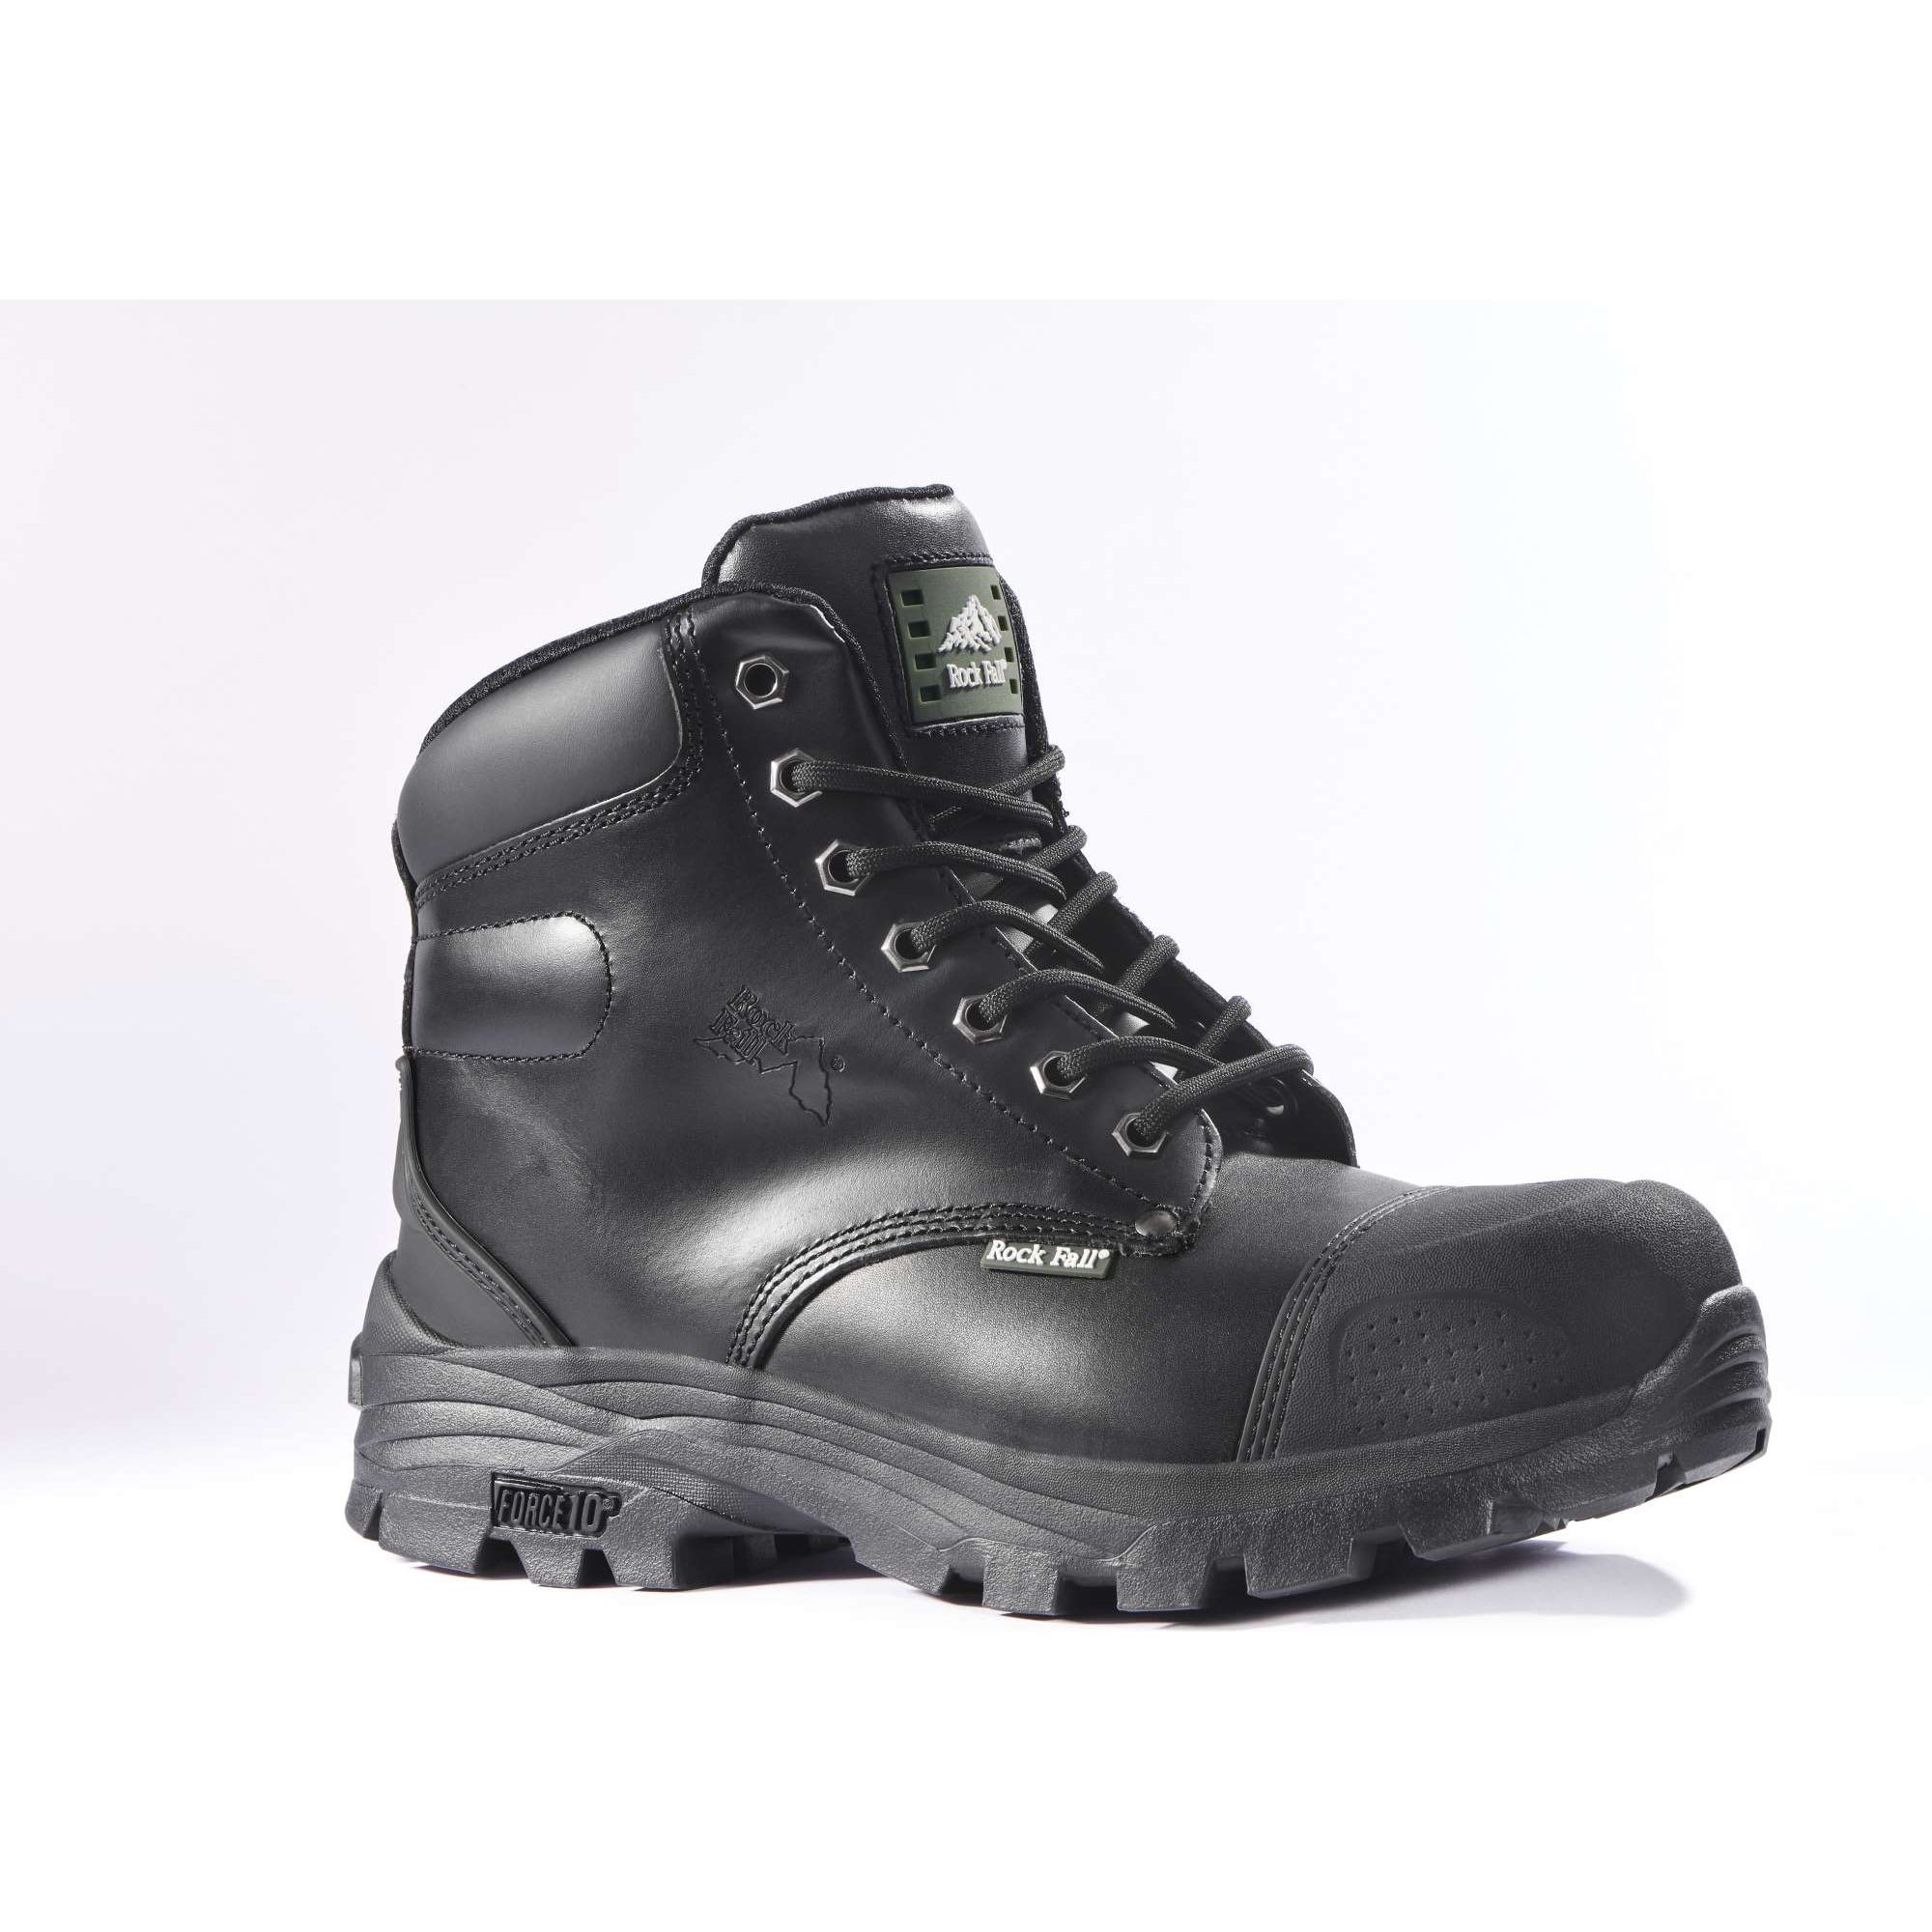 Rock Fall Ebonite S3 Safety Boots